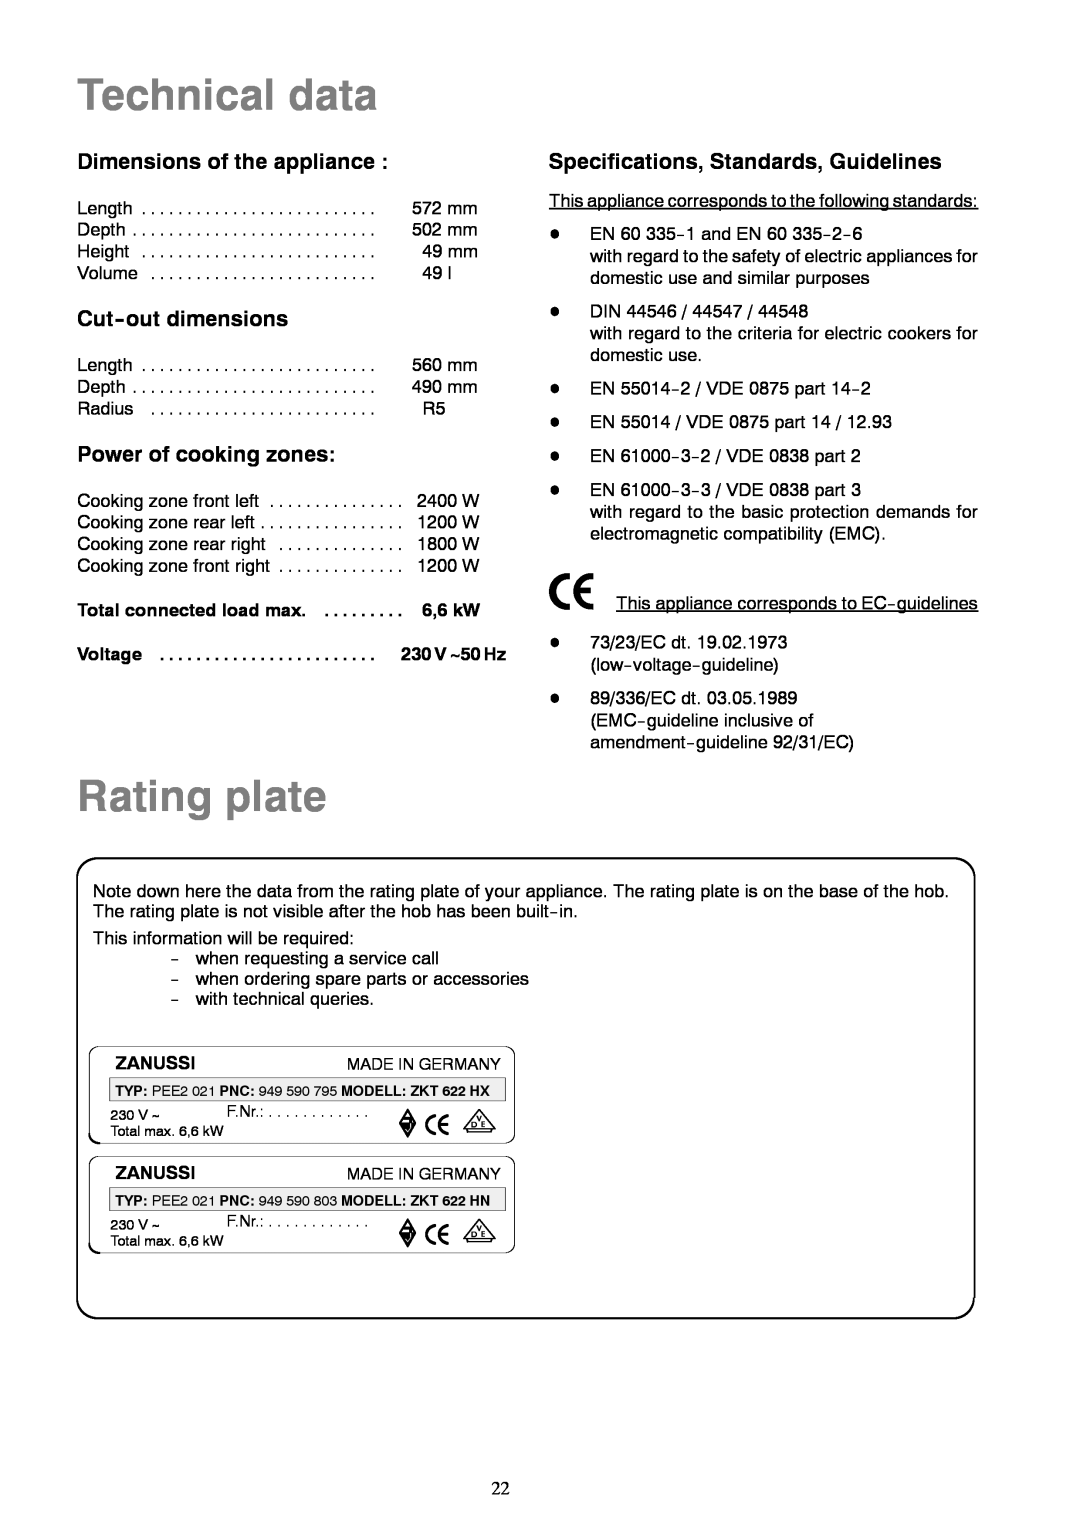 Zanussi ZKT 622 HN Technical data, Rating plate, Dimensions of the appliance, Cut-out dimensions, Power of cooking zones 